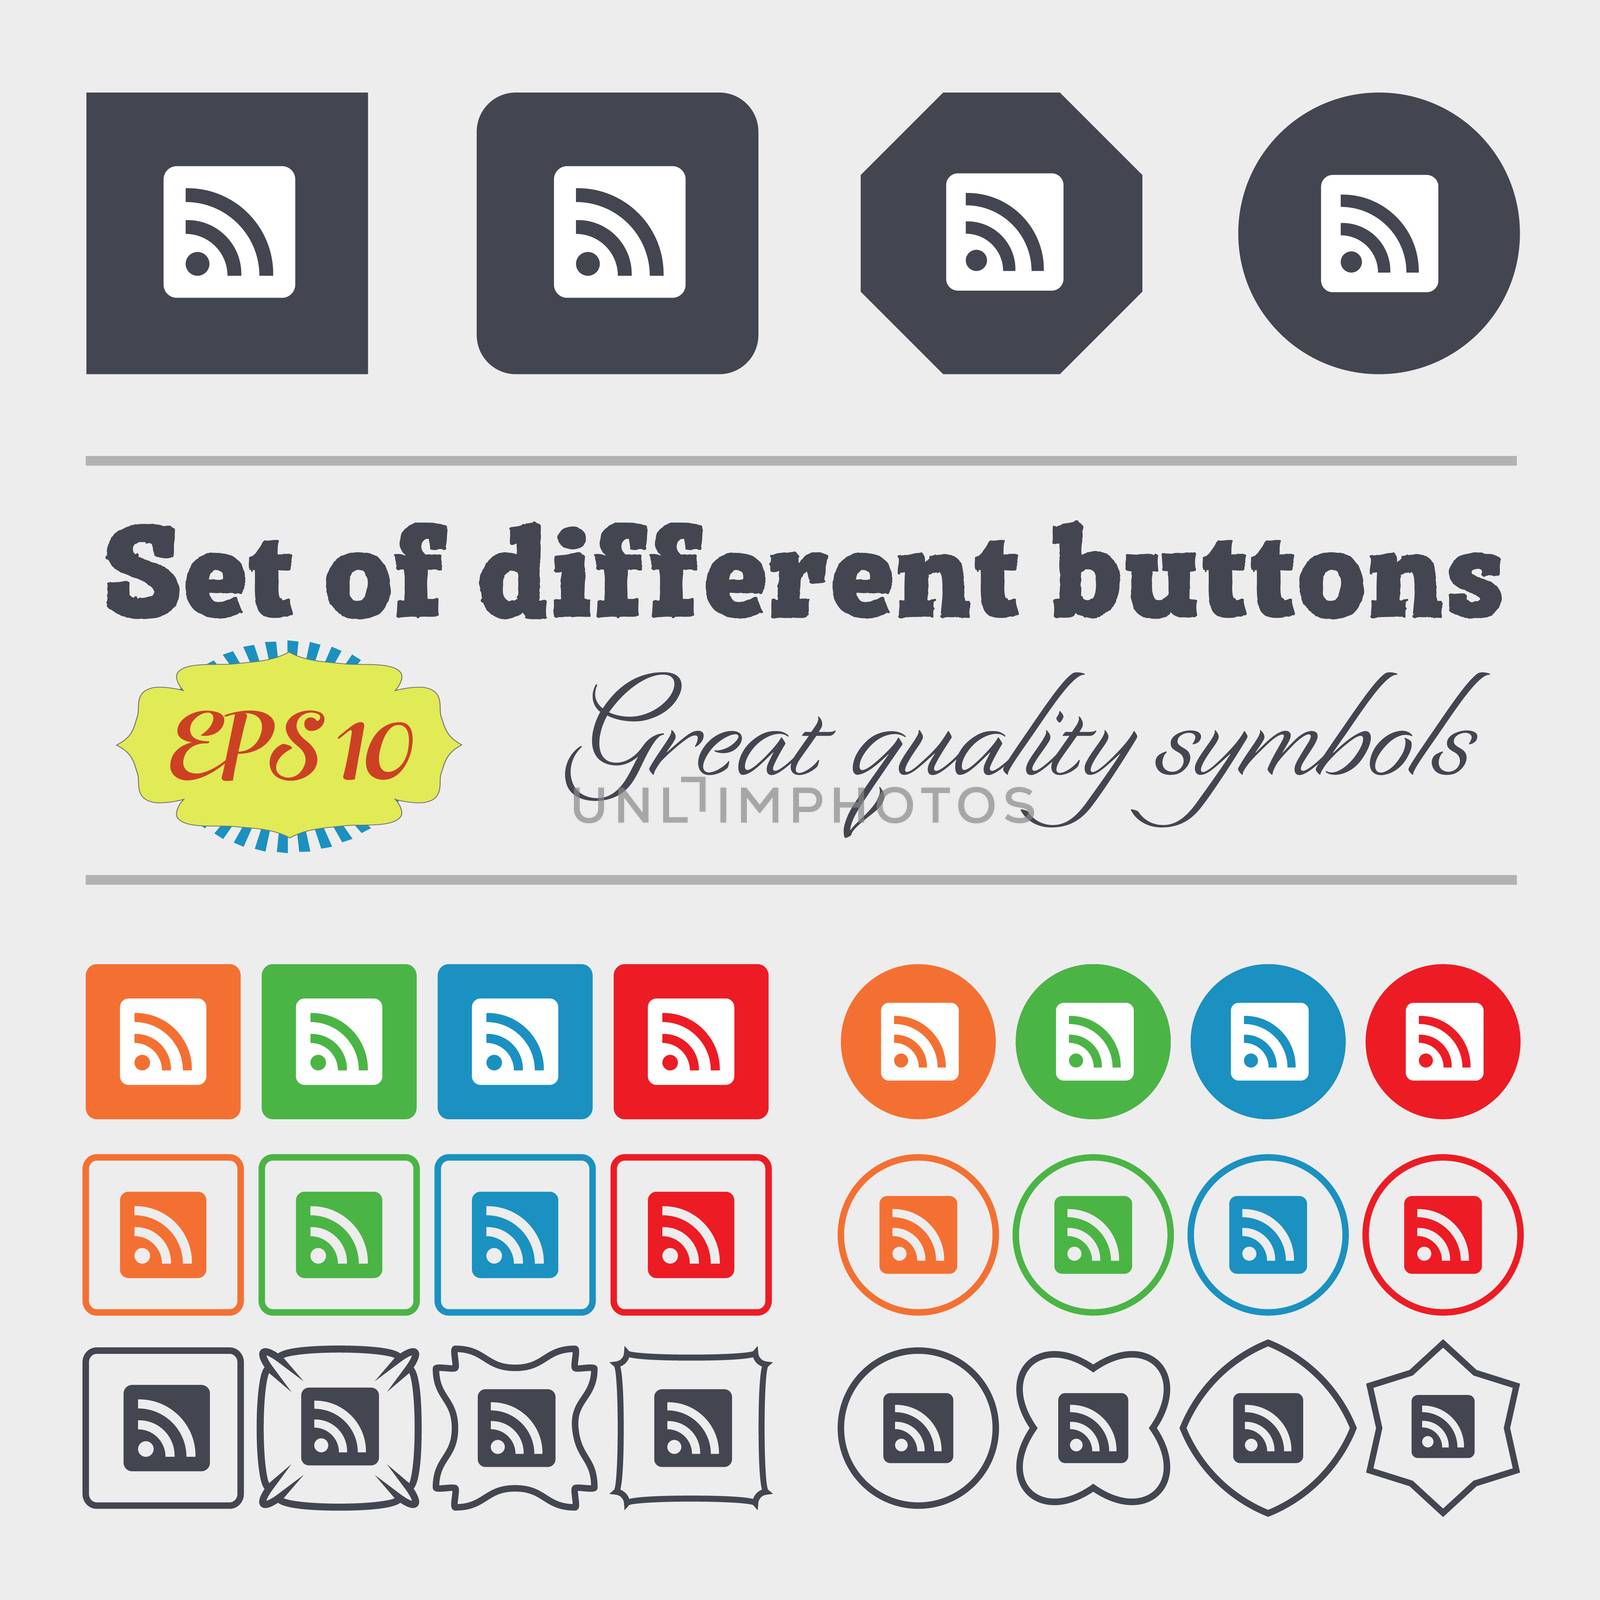 RSS feed icon sign Big set of colorful, diverse, high-quality buttons. illustration